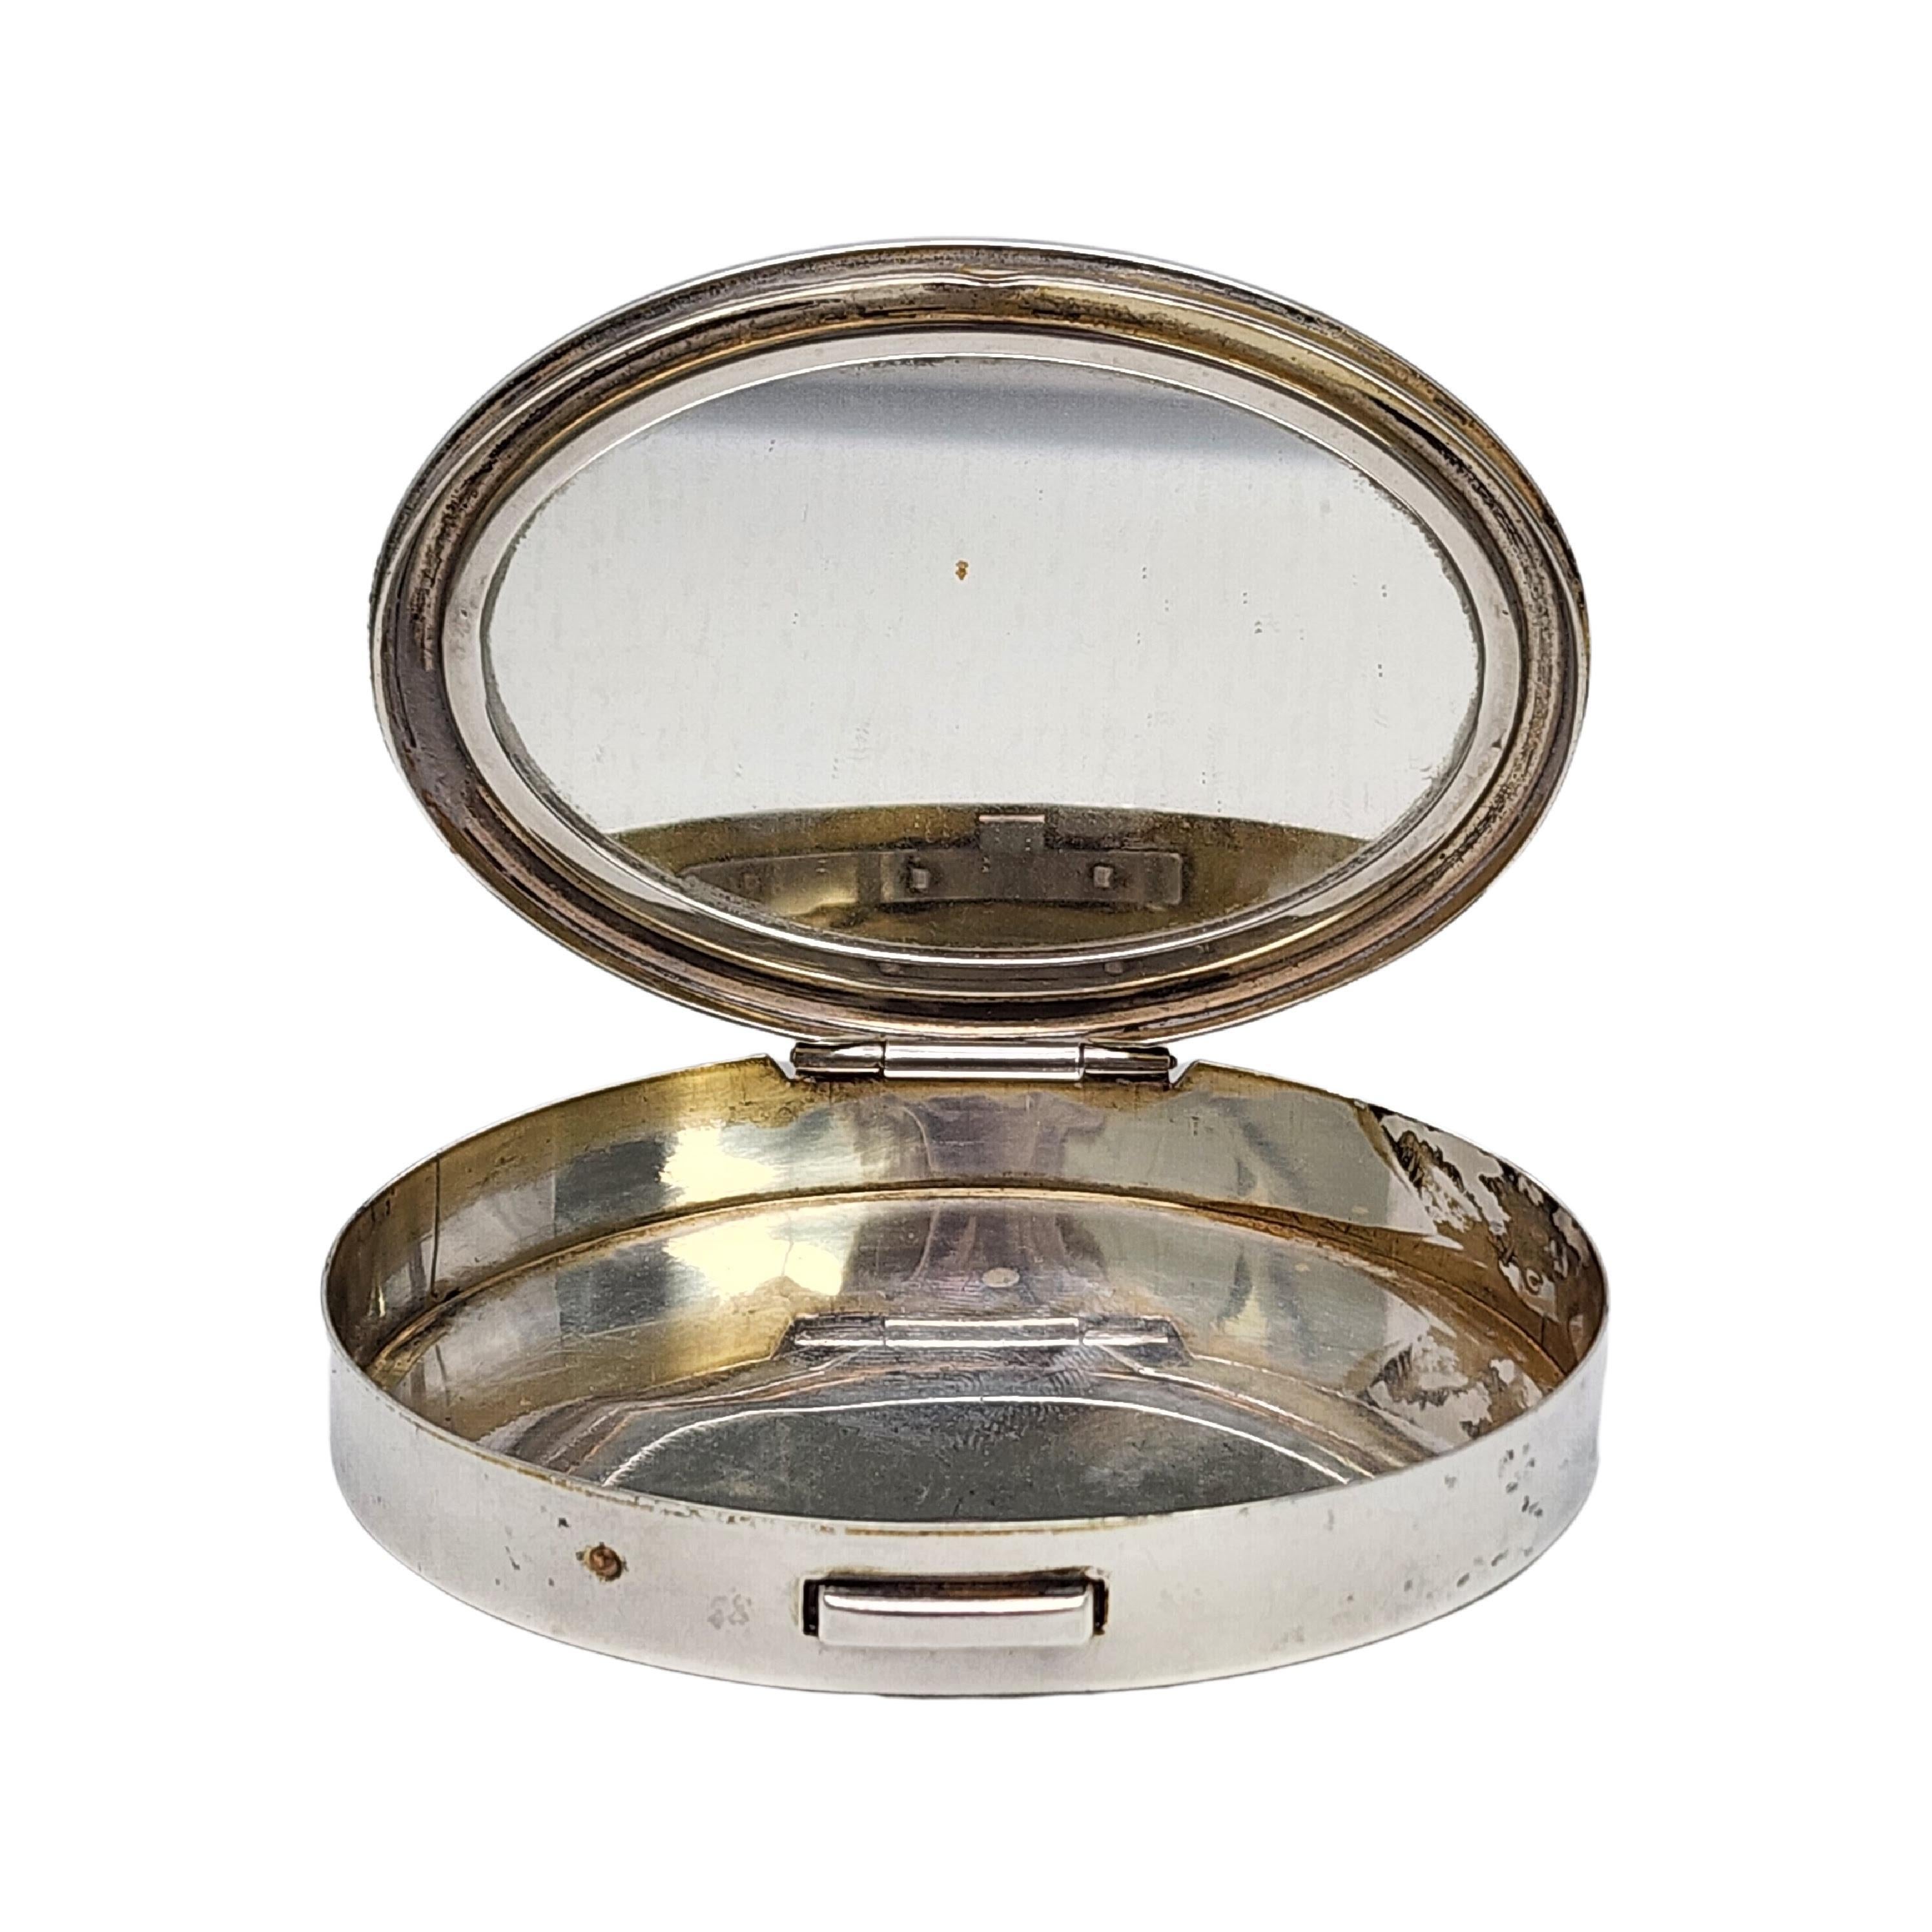 Women's Dunhill Sterling Silver Oval Mirror Compact #16887 For Sale